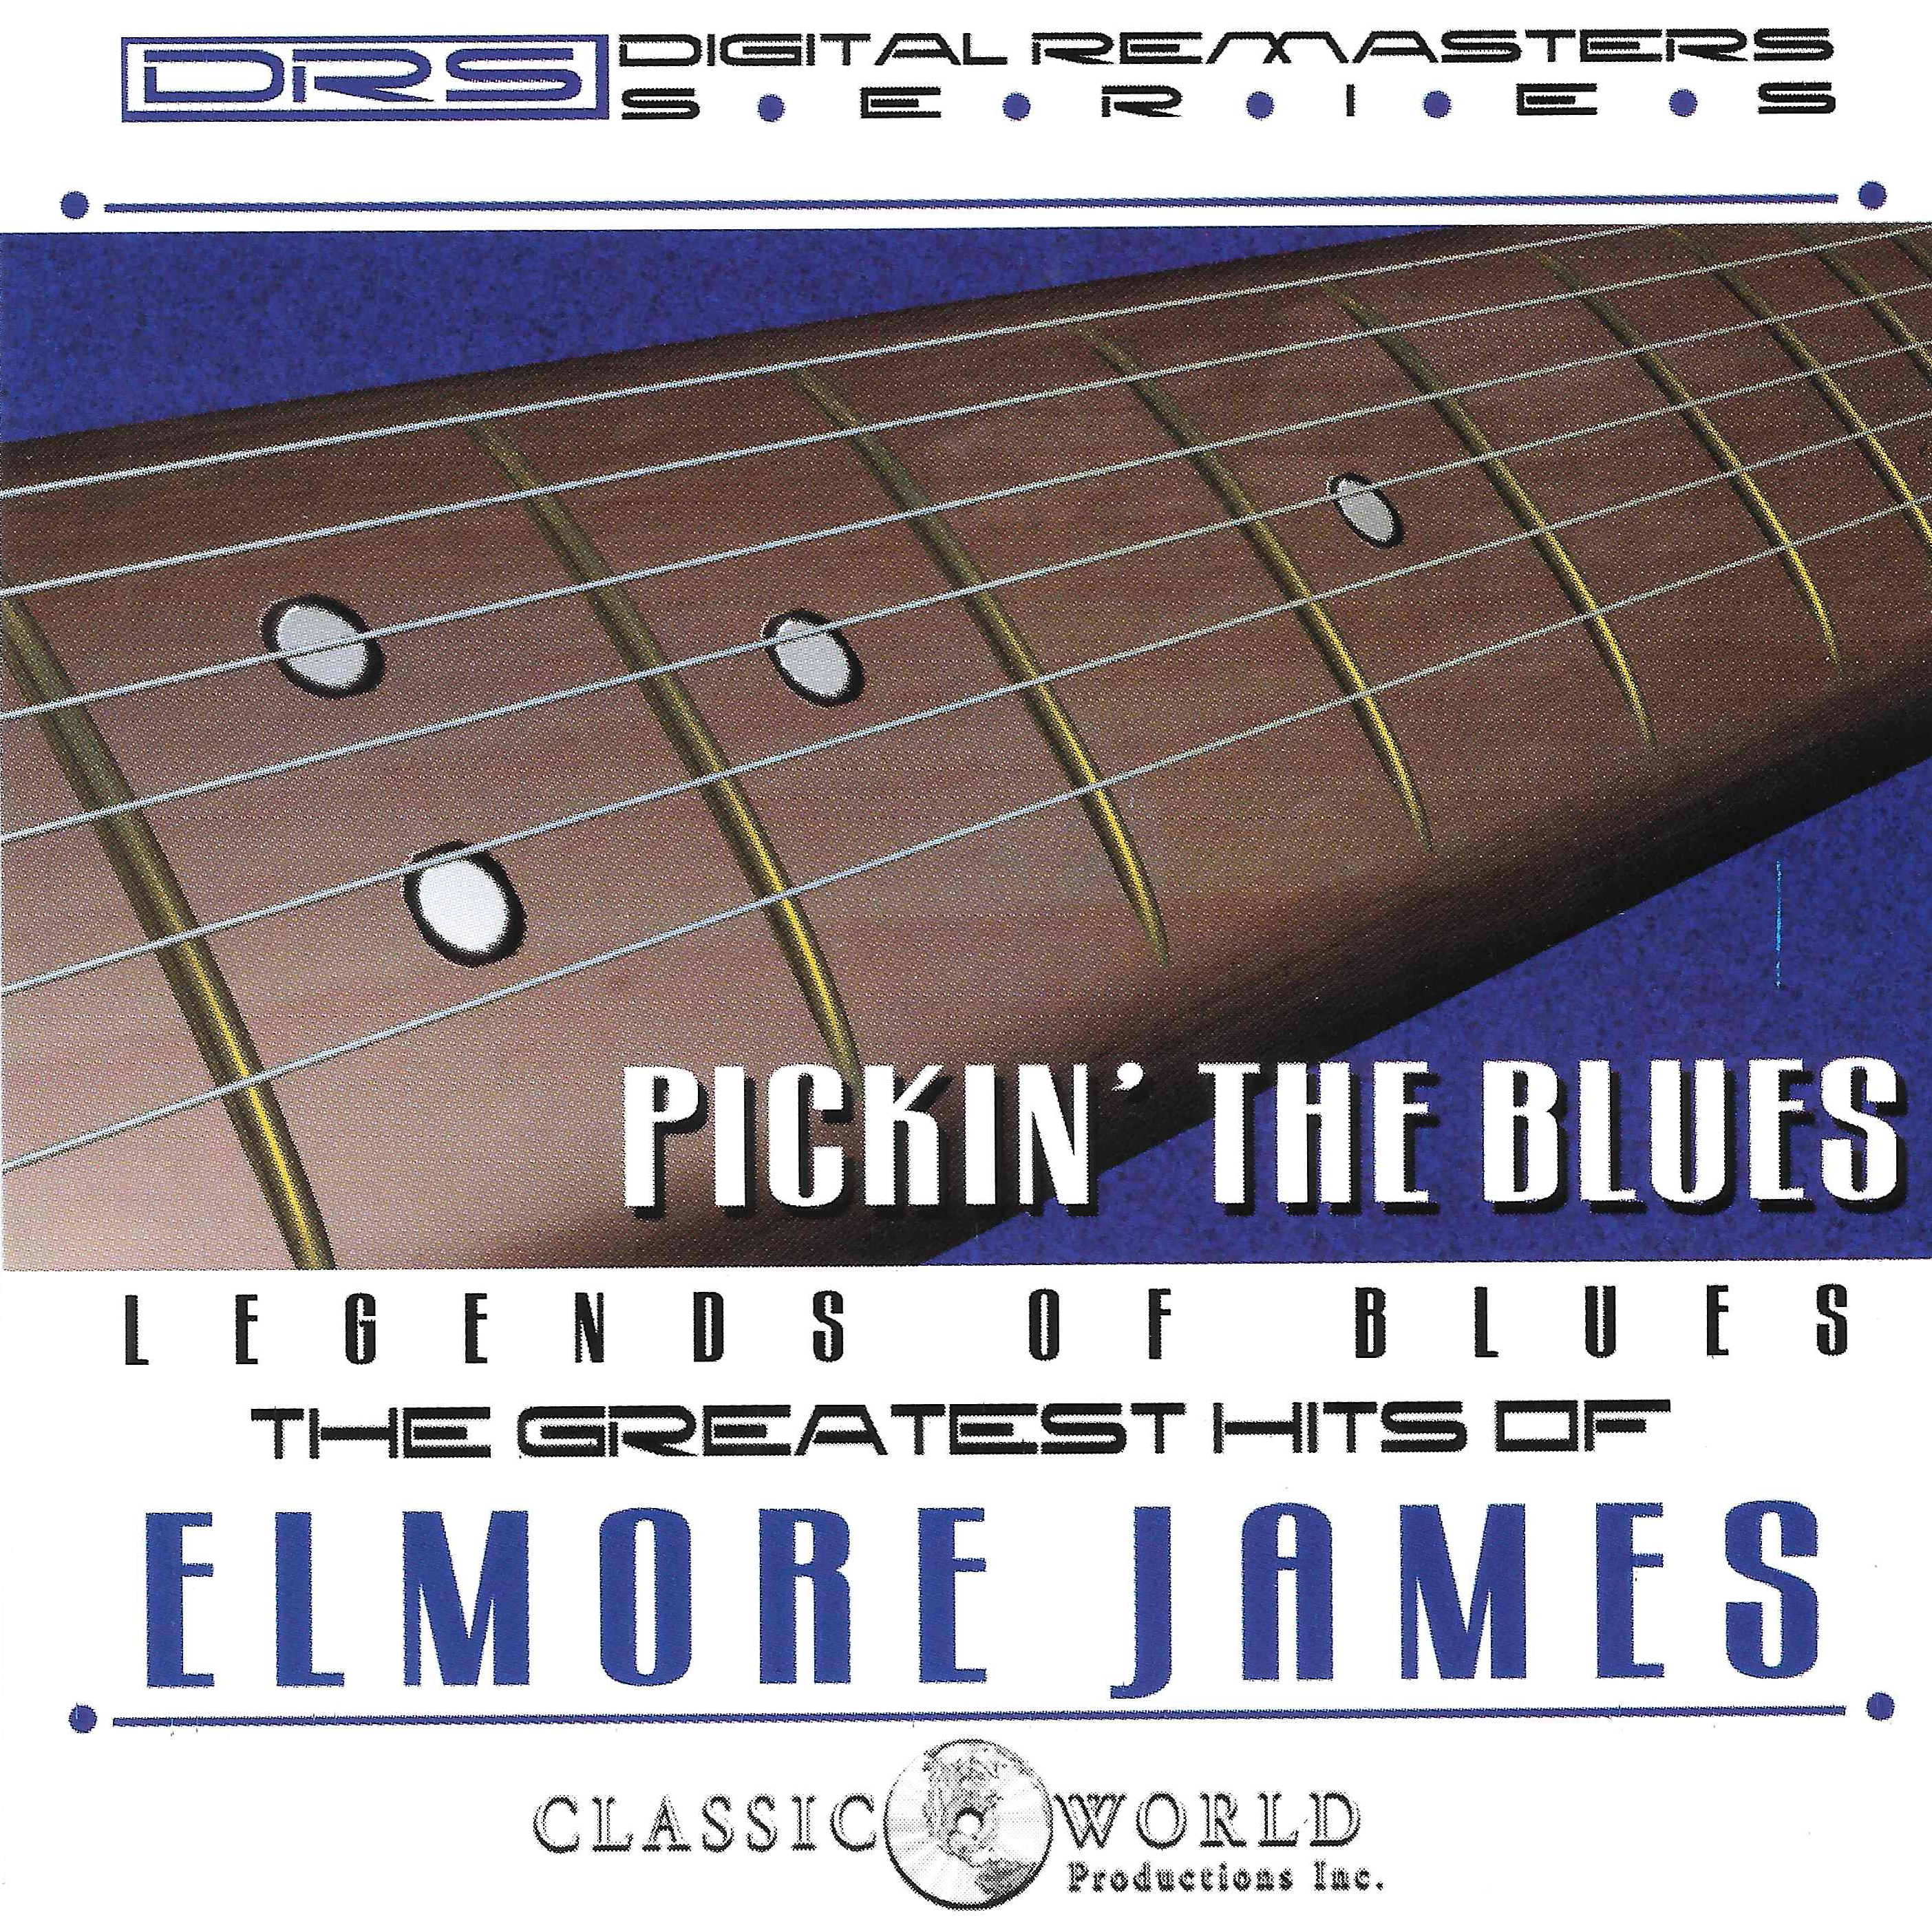 Pickin' The Blues: Greatest Hits Of Elmore James